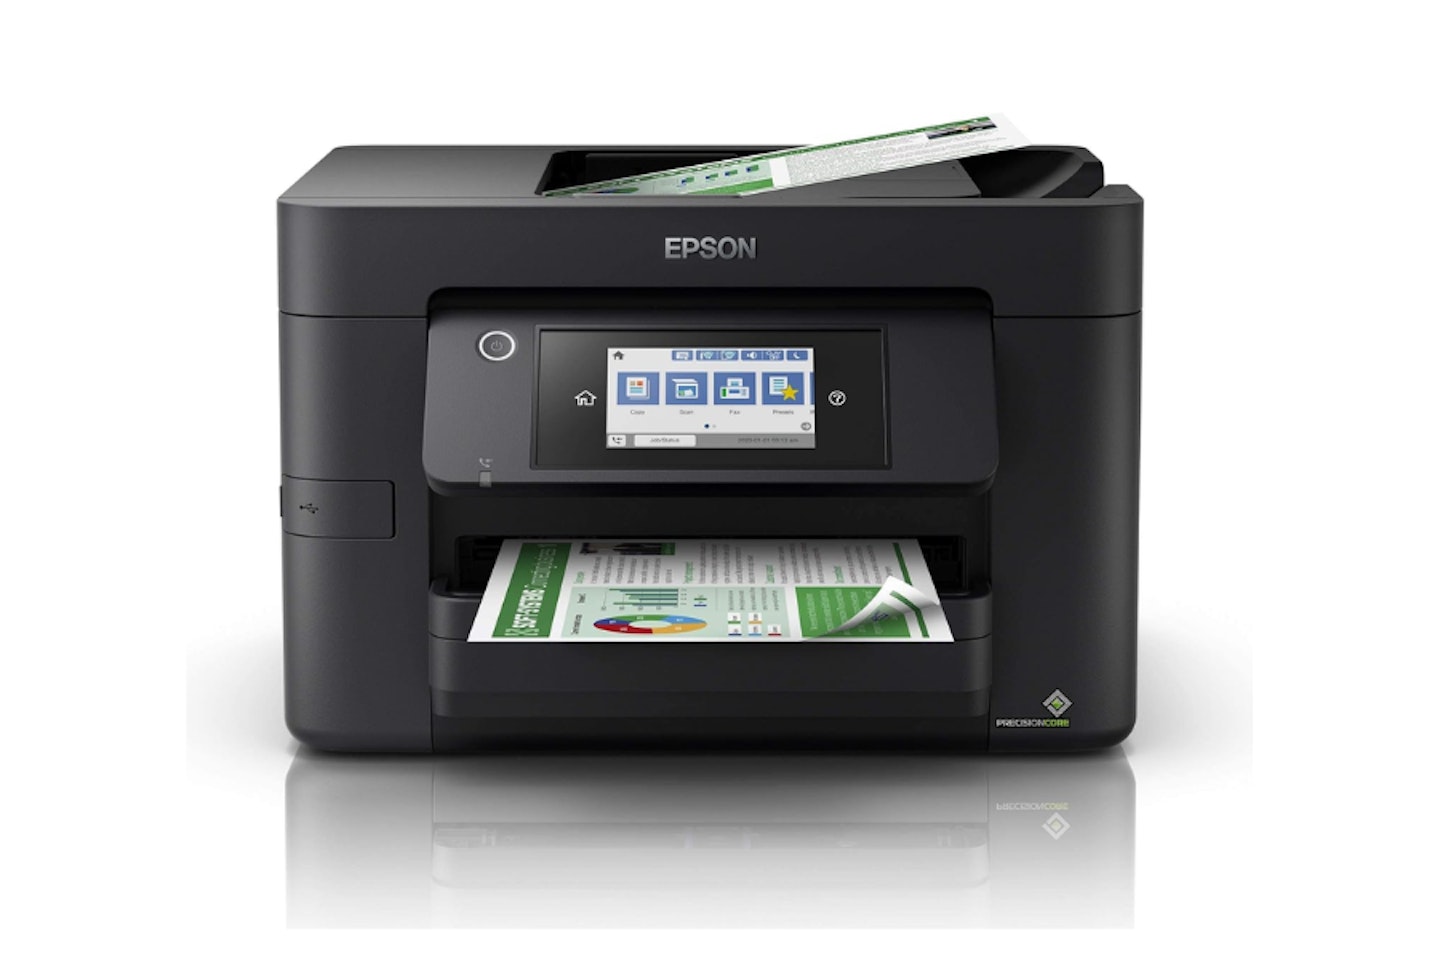 Epson WorkForce WF-4820 All-in-One Wireless Colour Printer - one of the best budget printers